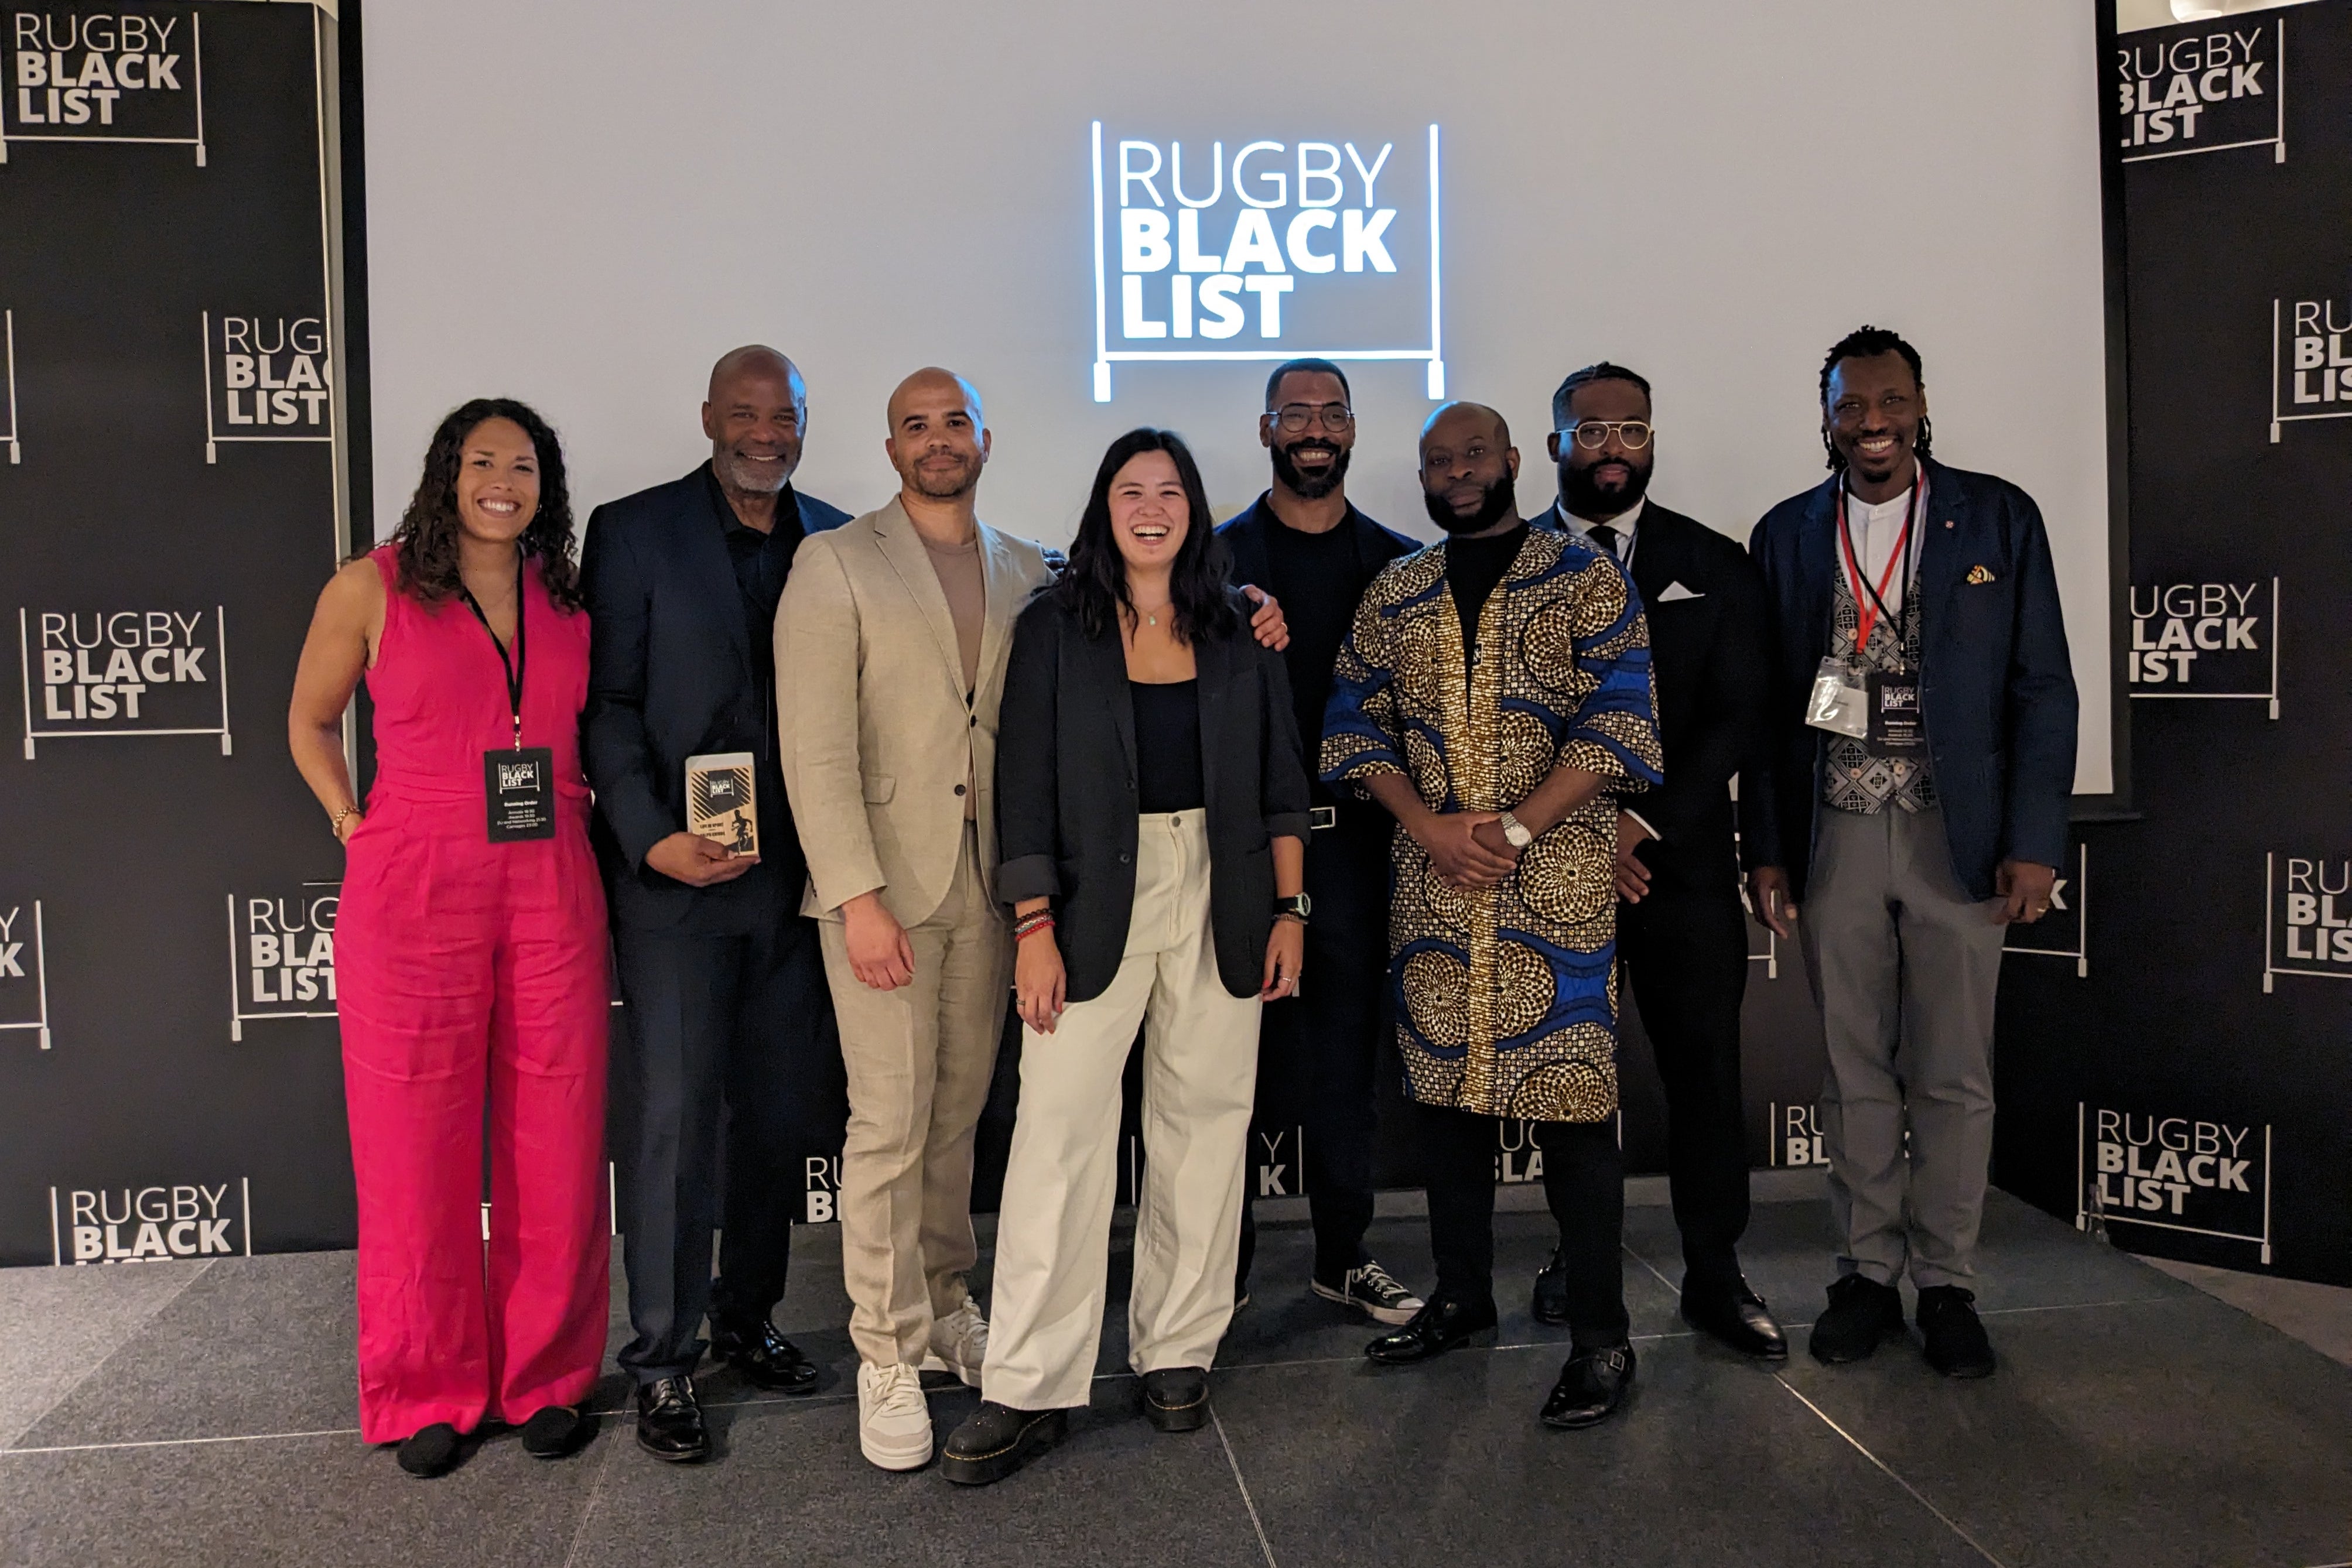 The Rugby Black List are working to create a more inclusive sport